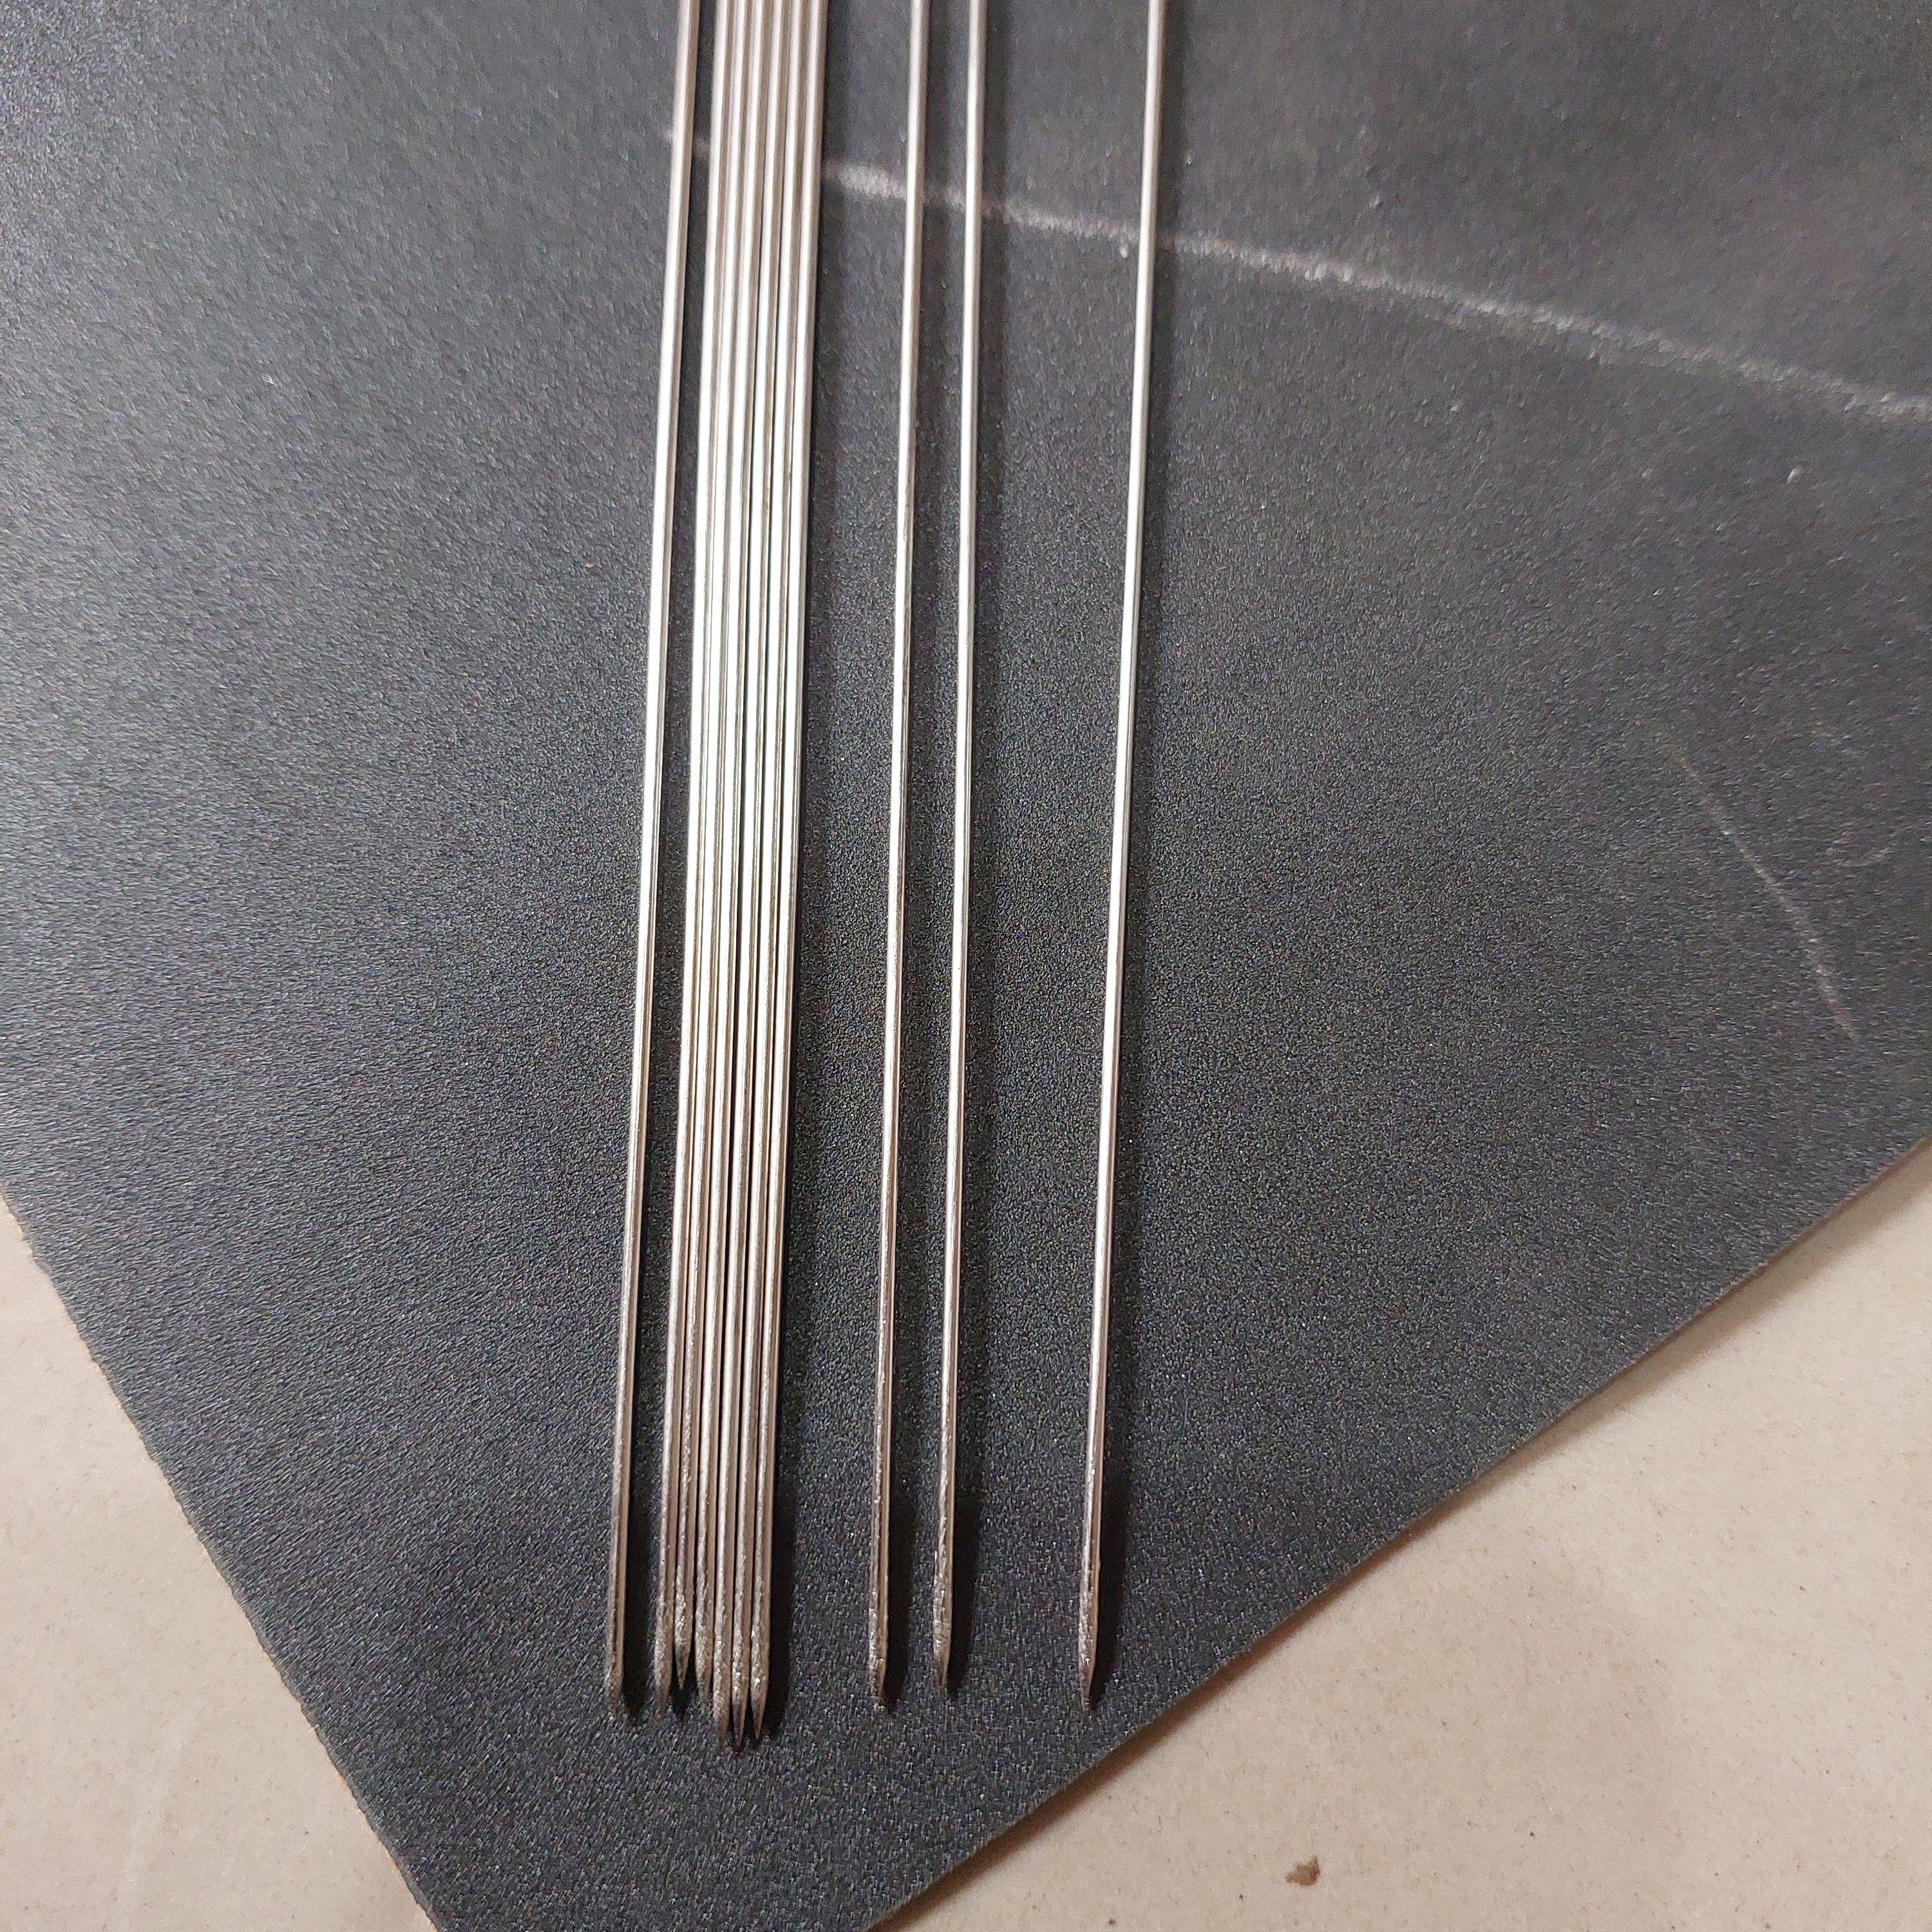 12 Inch flower needle 10piece in a pack